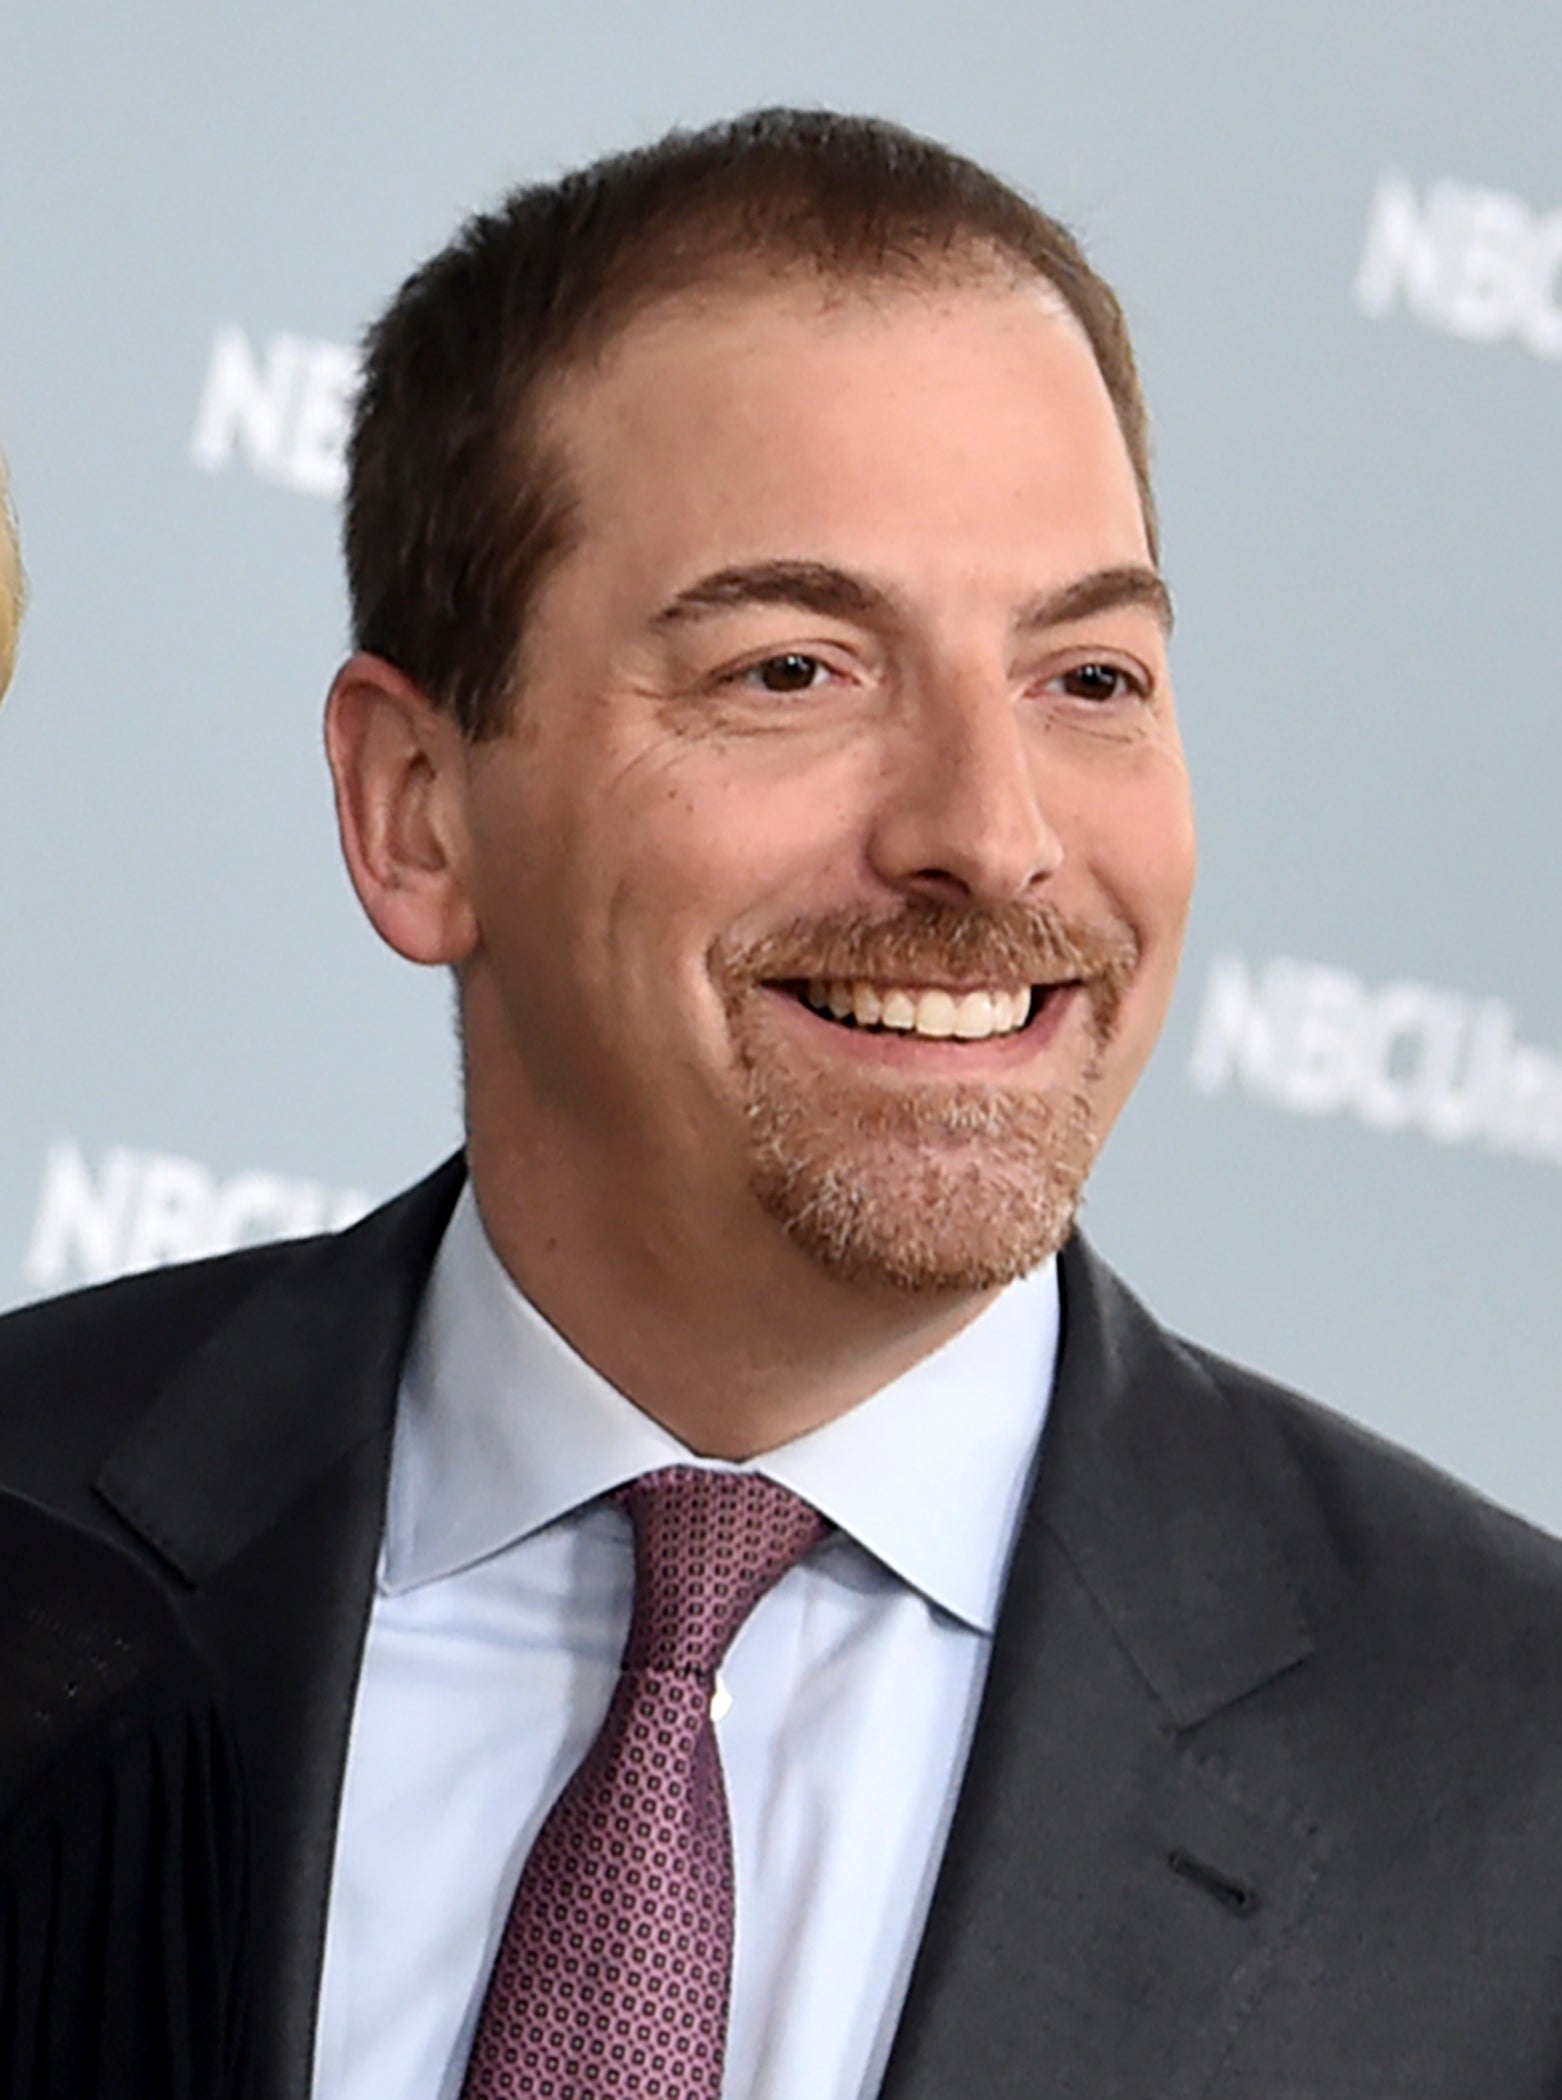 Chuck Todd said on Sunday that he’ll be leaving “Meet the Press”.